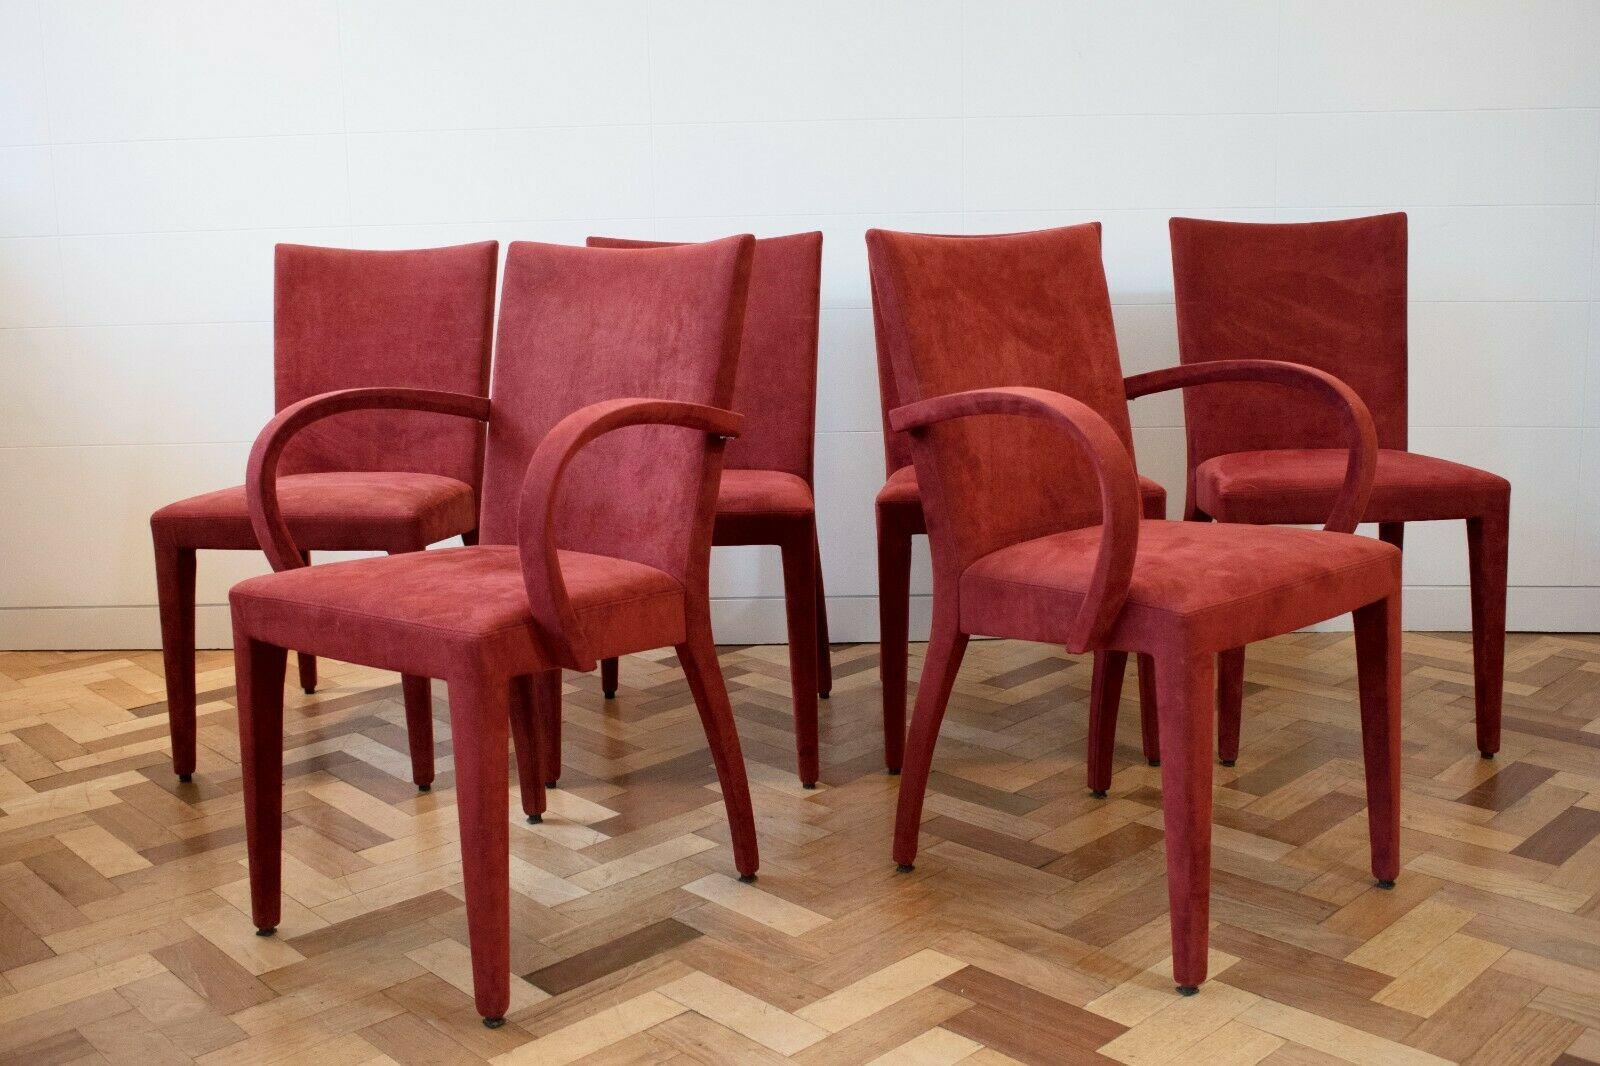 Modern Roche Bobois Red Suede Dining Chairs, Set of 6 